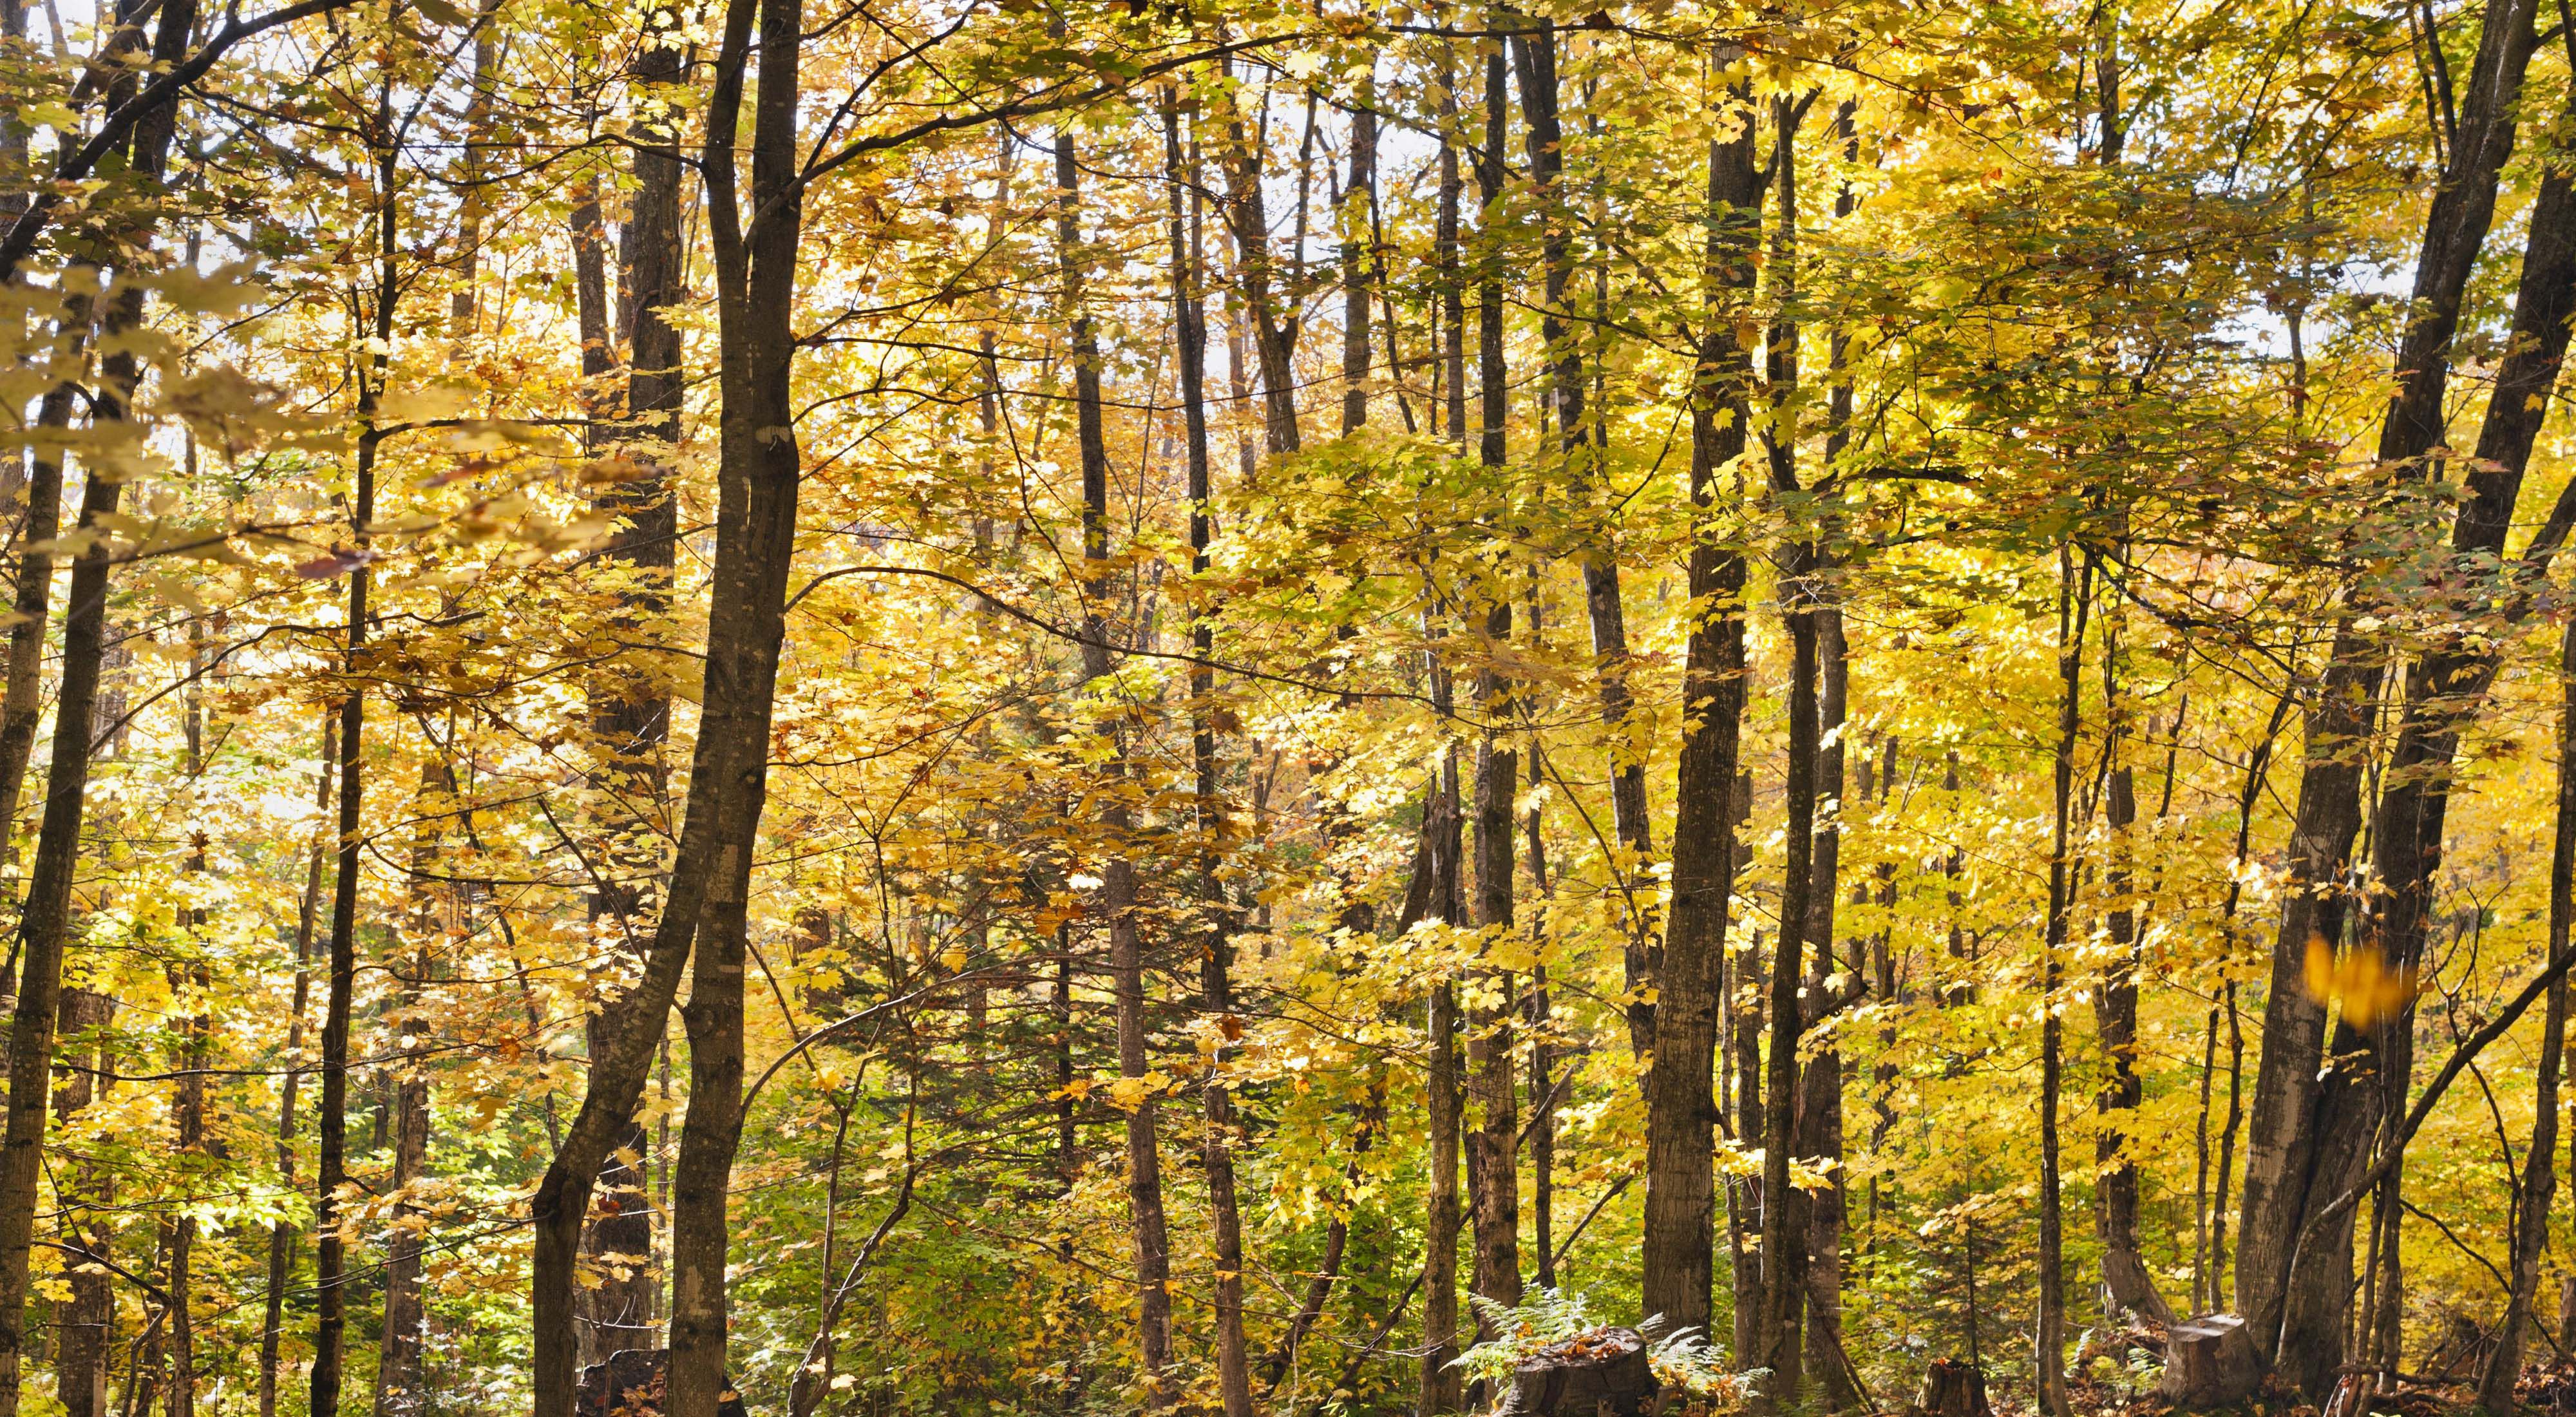 A hardwood forest stand in Michigan's Two Hearted River Forest Reserve.